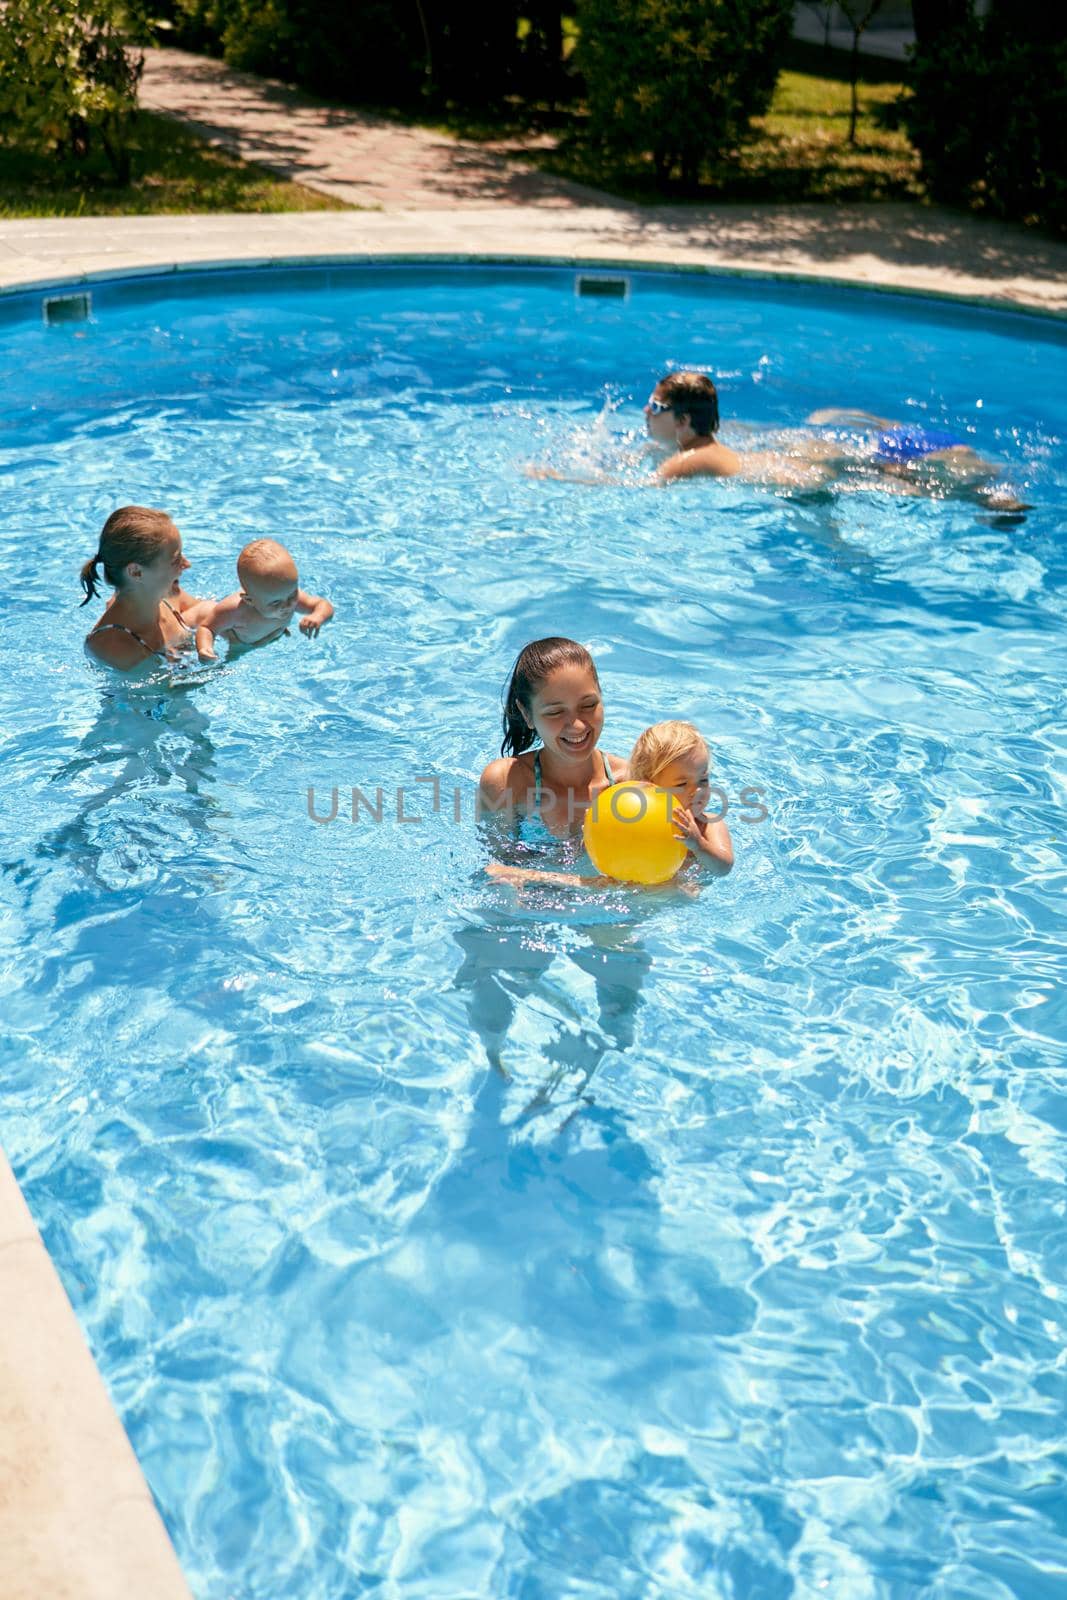 Mothers with young children swim in the pool. High quality photo